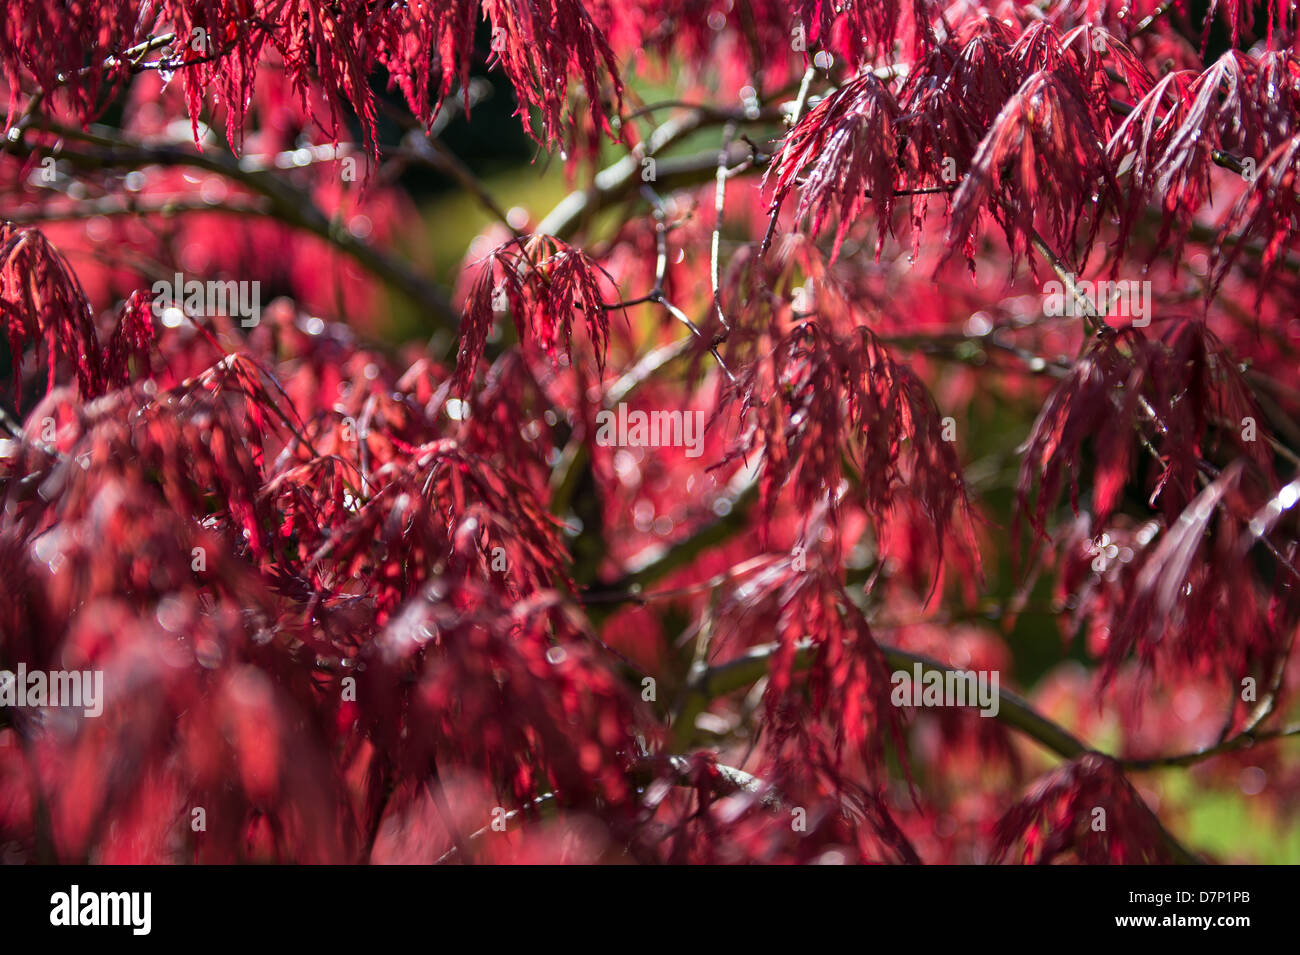 Acer leaves in close Stock Photo